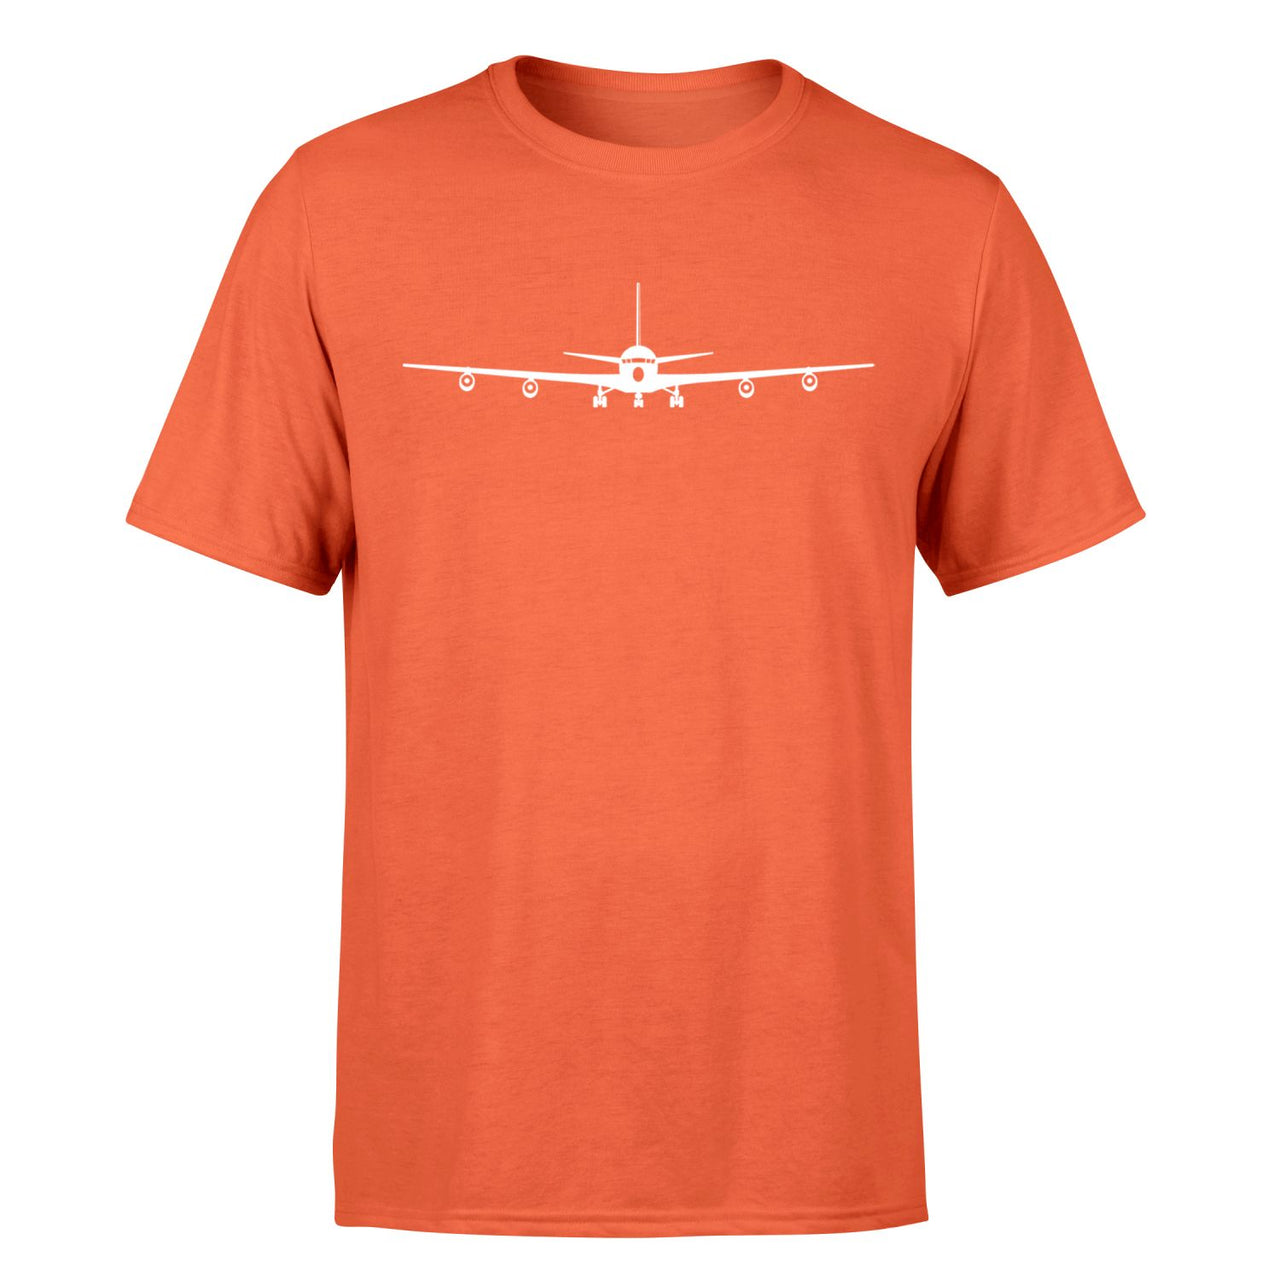 Boeing 707 Silhouette Designed T-Shirts